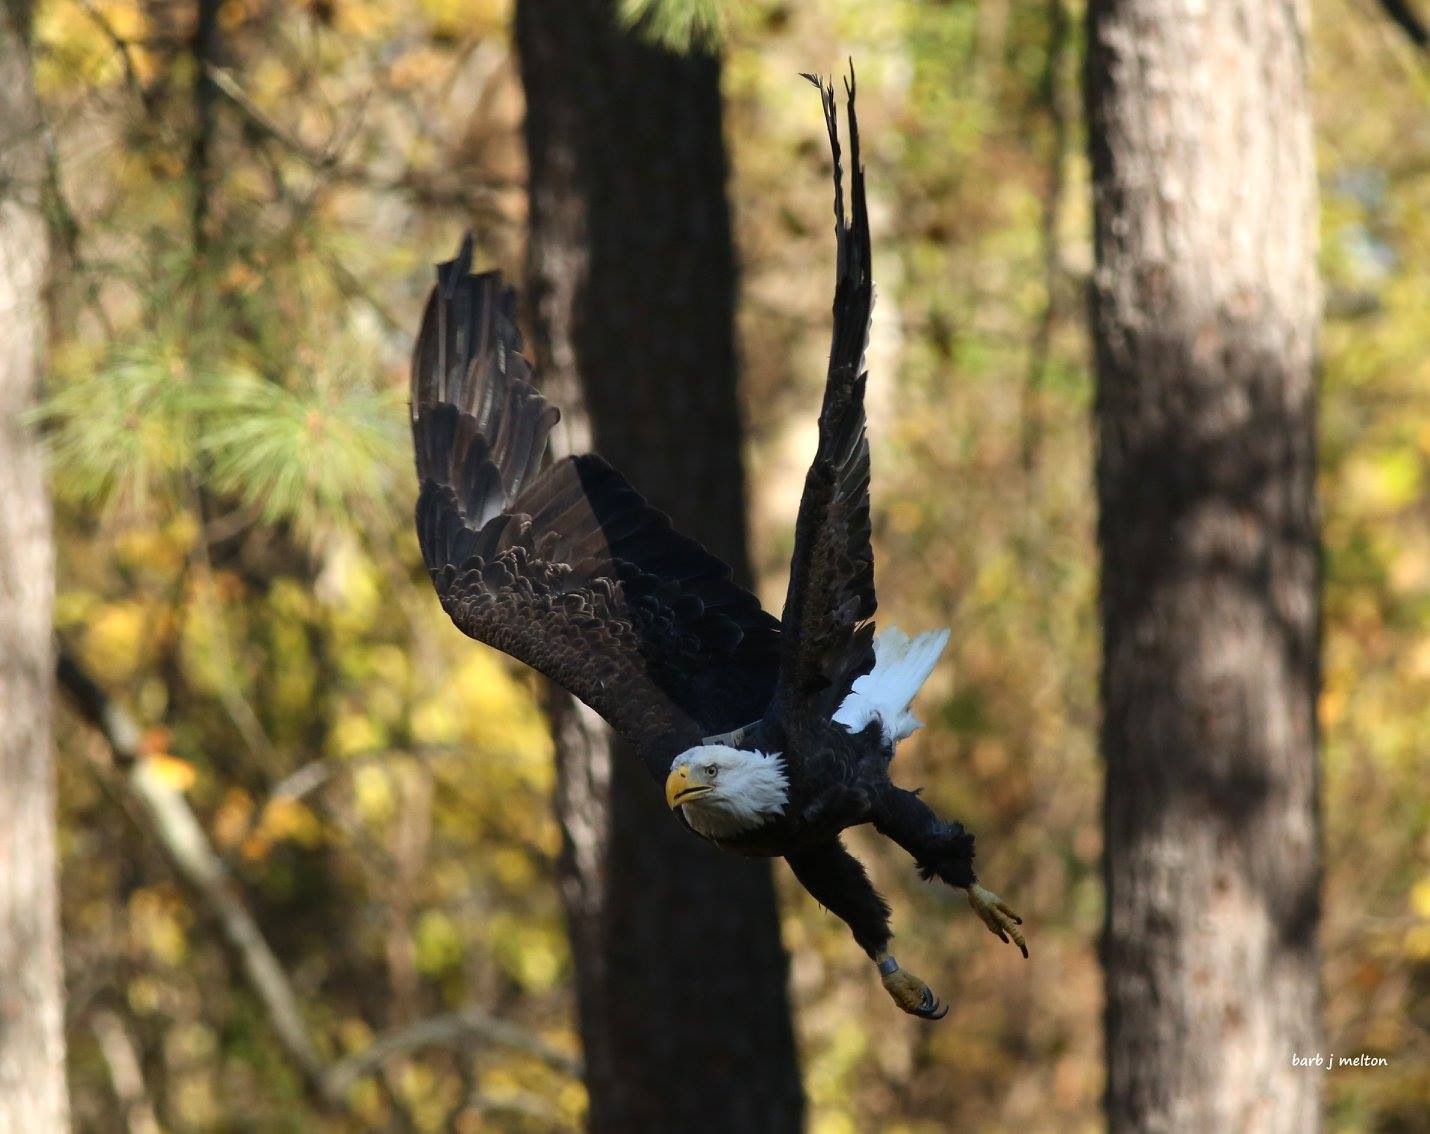 Wednesday afternoon, the eagle was released at Chippokes Plantation State Park in Surry in front of an eager gathering of spectators.